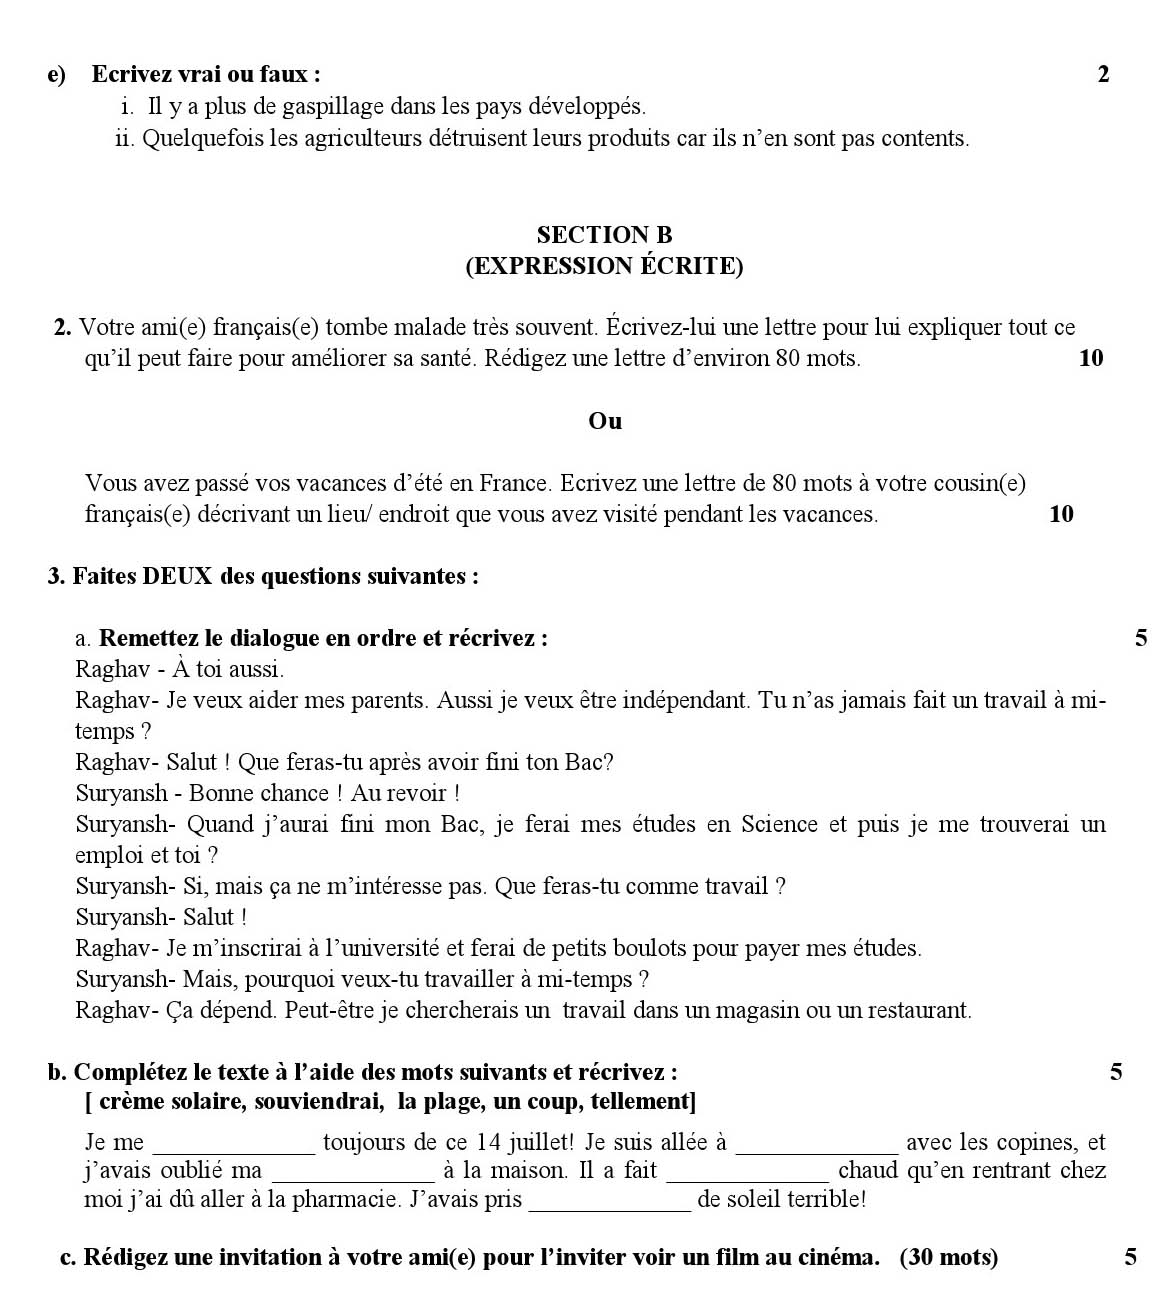 French CBSE Class X Sample Question Paper 2018-19 - Image 2